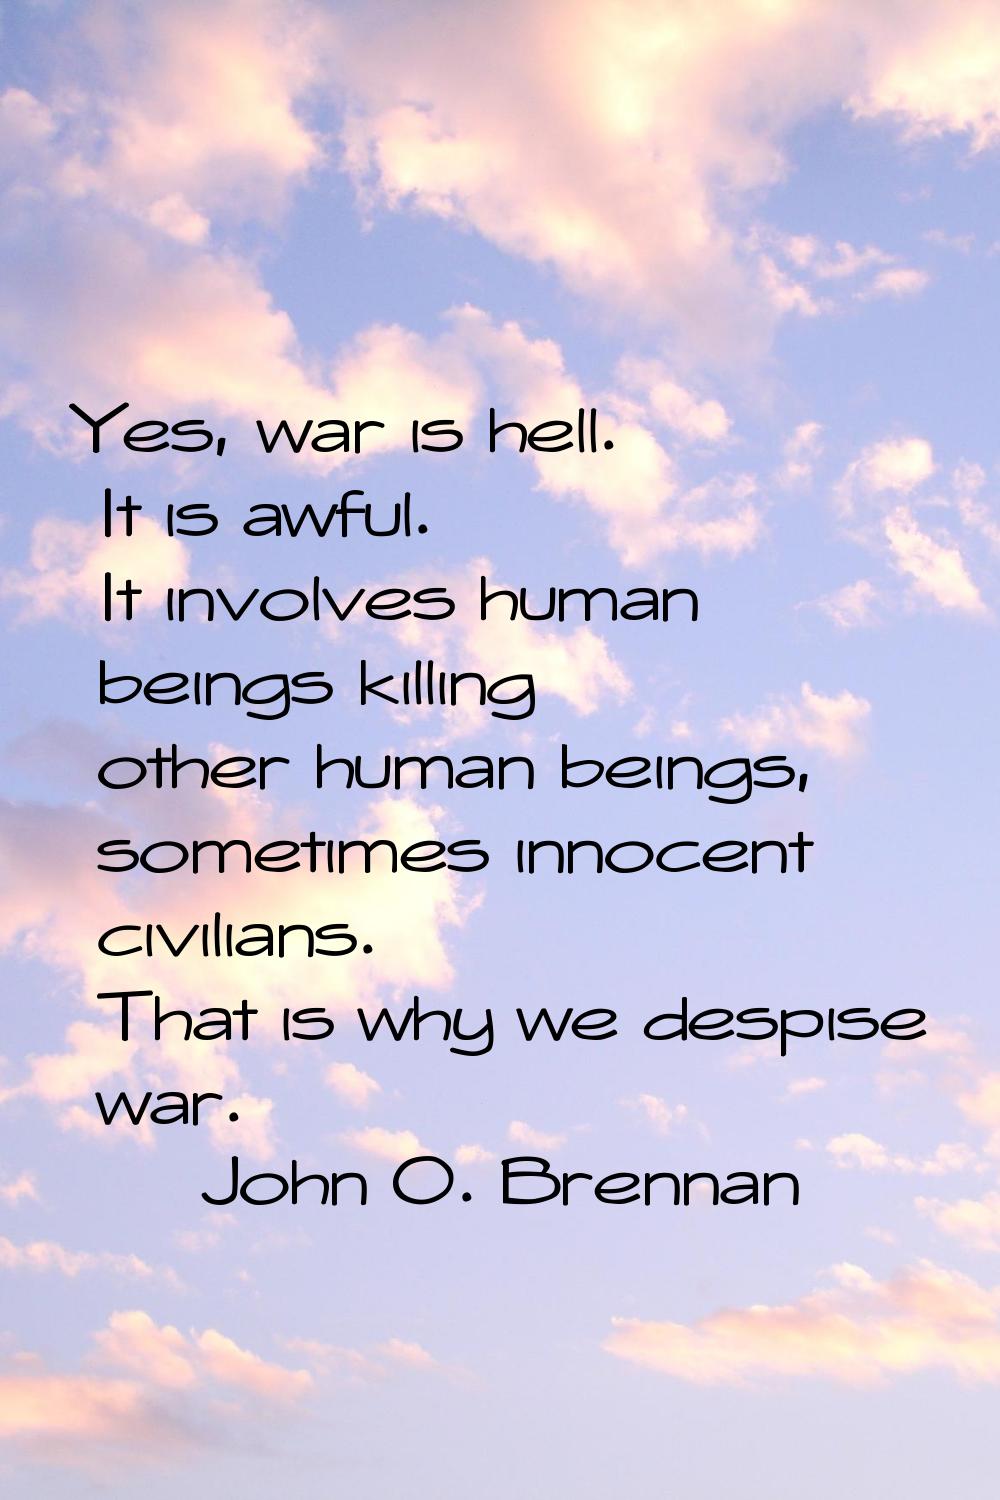 Yes, war is hell. It is awful. It involves human beings killing other human beings, sometimes innoc